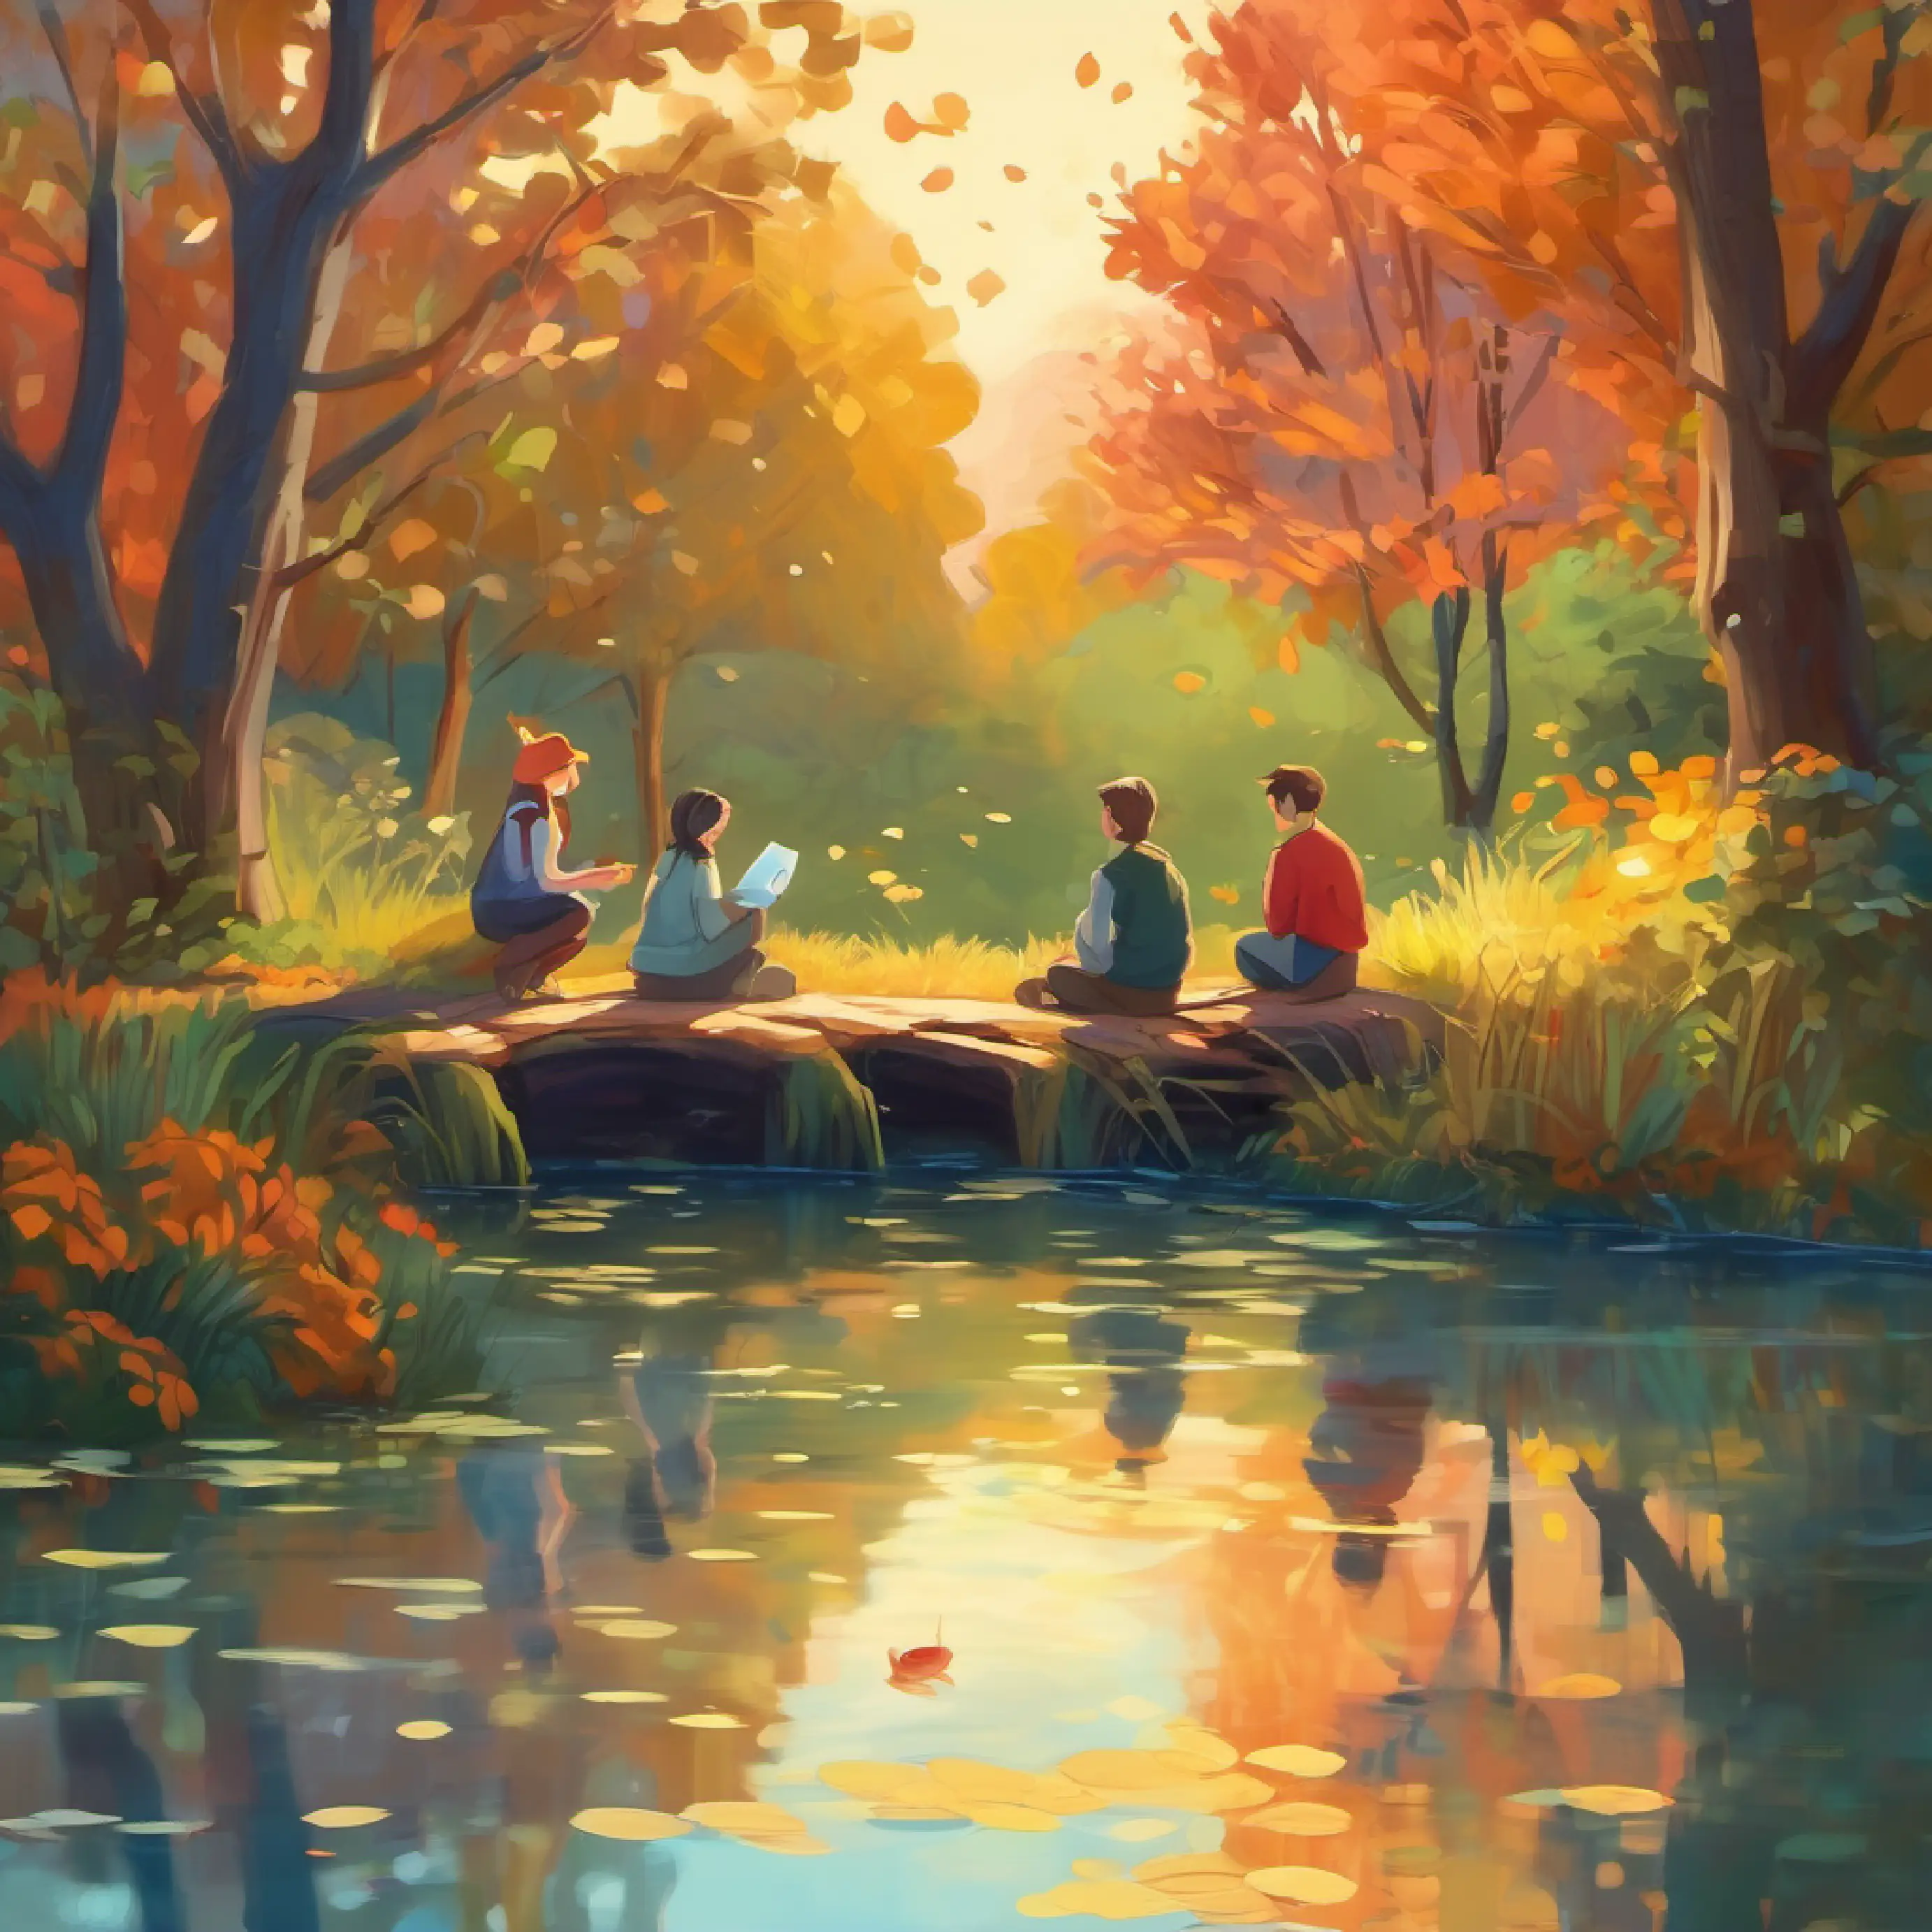 After the fall, friends share stories by the pond.